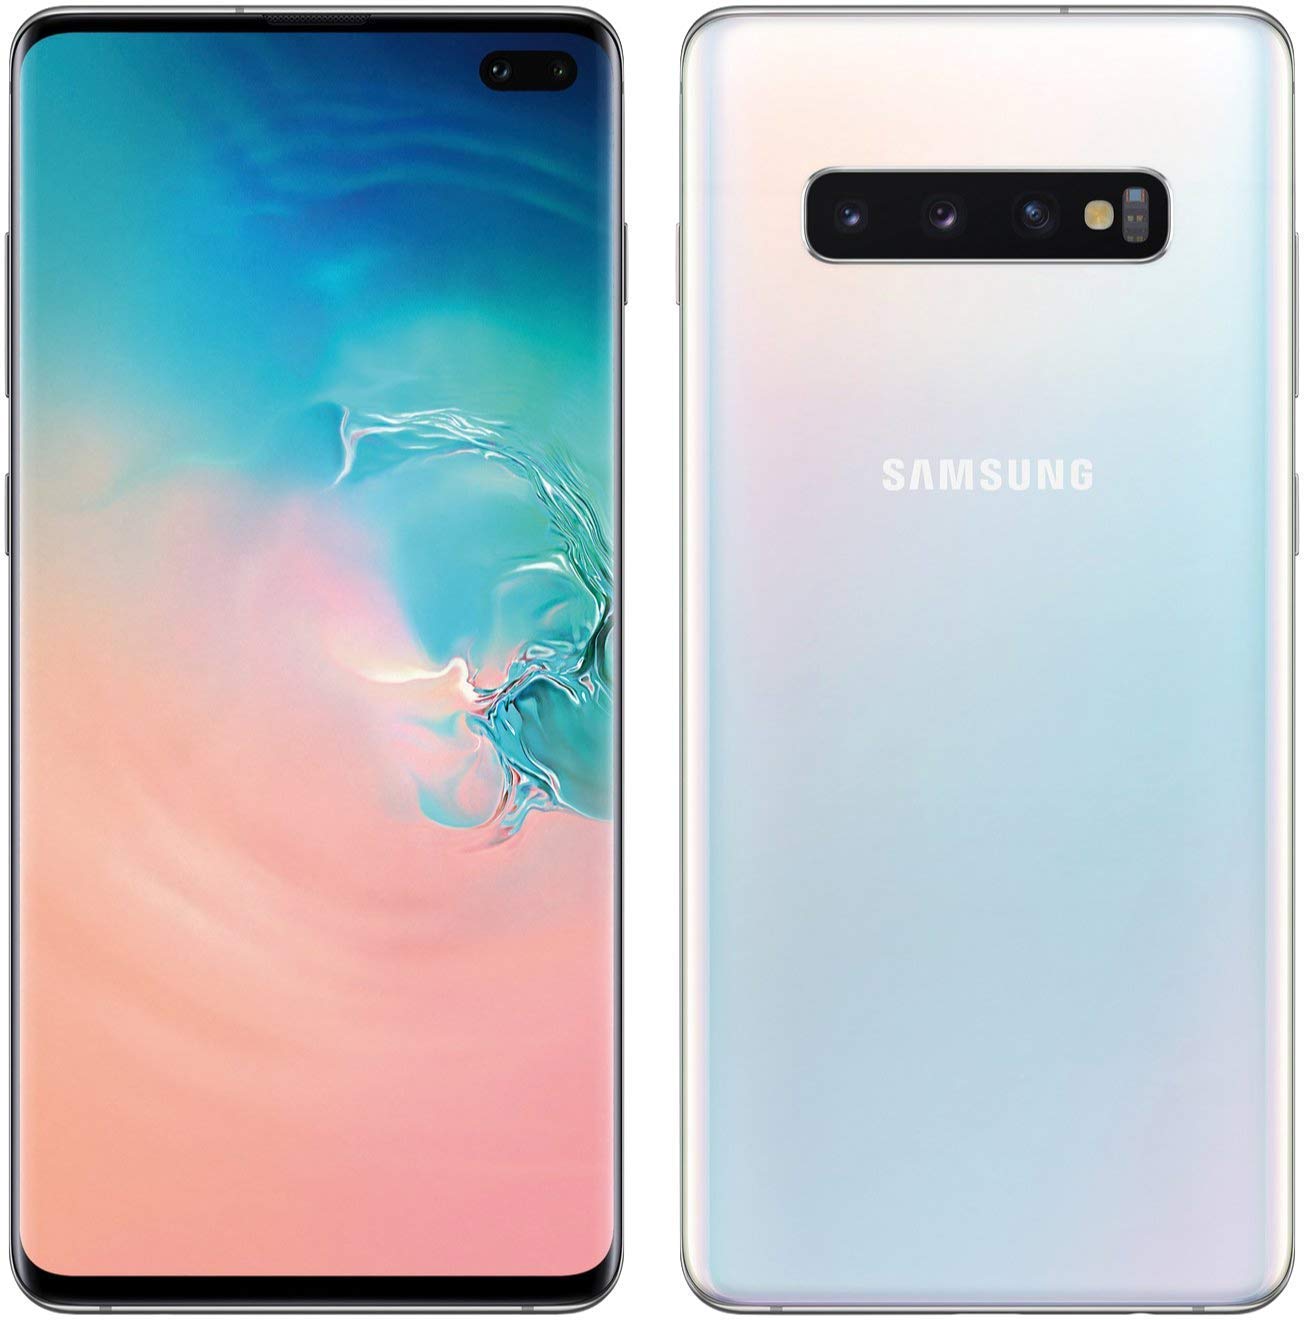 SAMSUNG Galaxy S10 G973F Hybrid Dual SIM 128GB Unlocked GSM LTE Phone with Triple 12MP+12MP+16MP Rear Camera (International Variant/US Compatible LTE) - Prism White